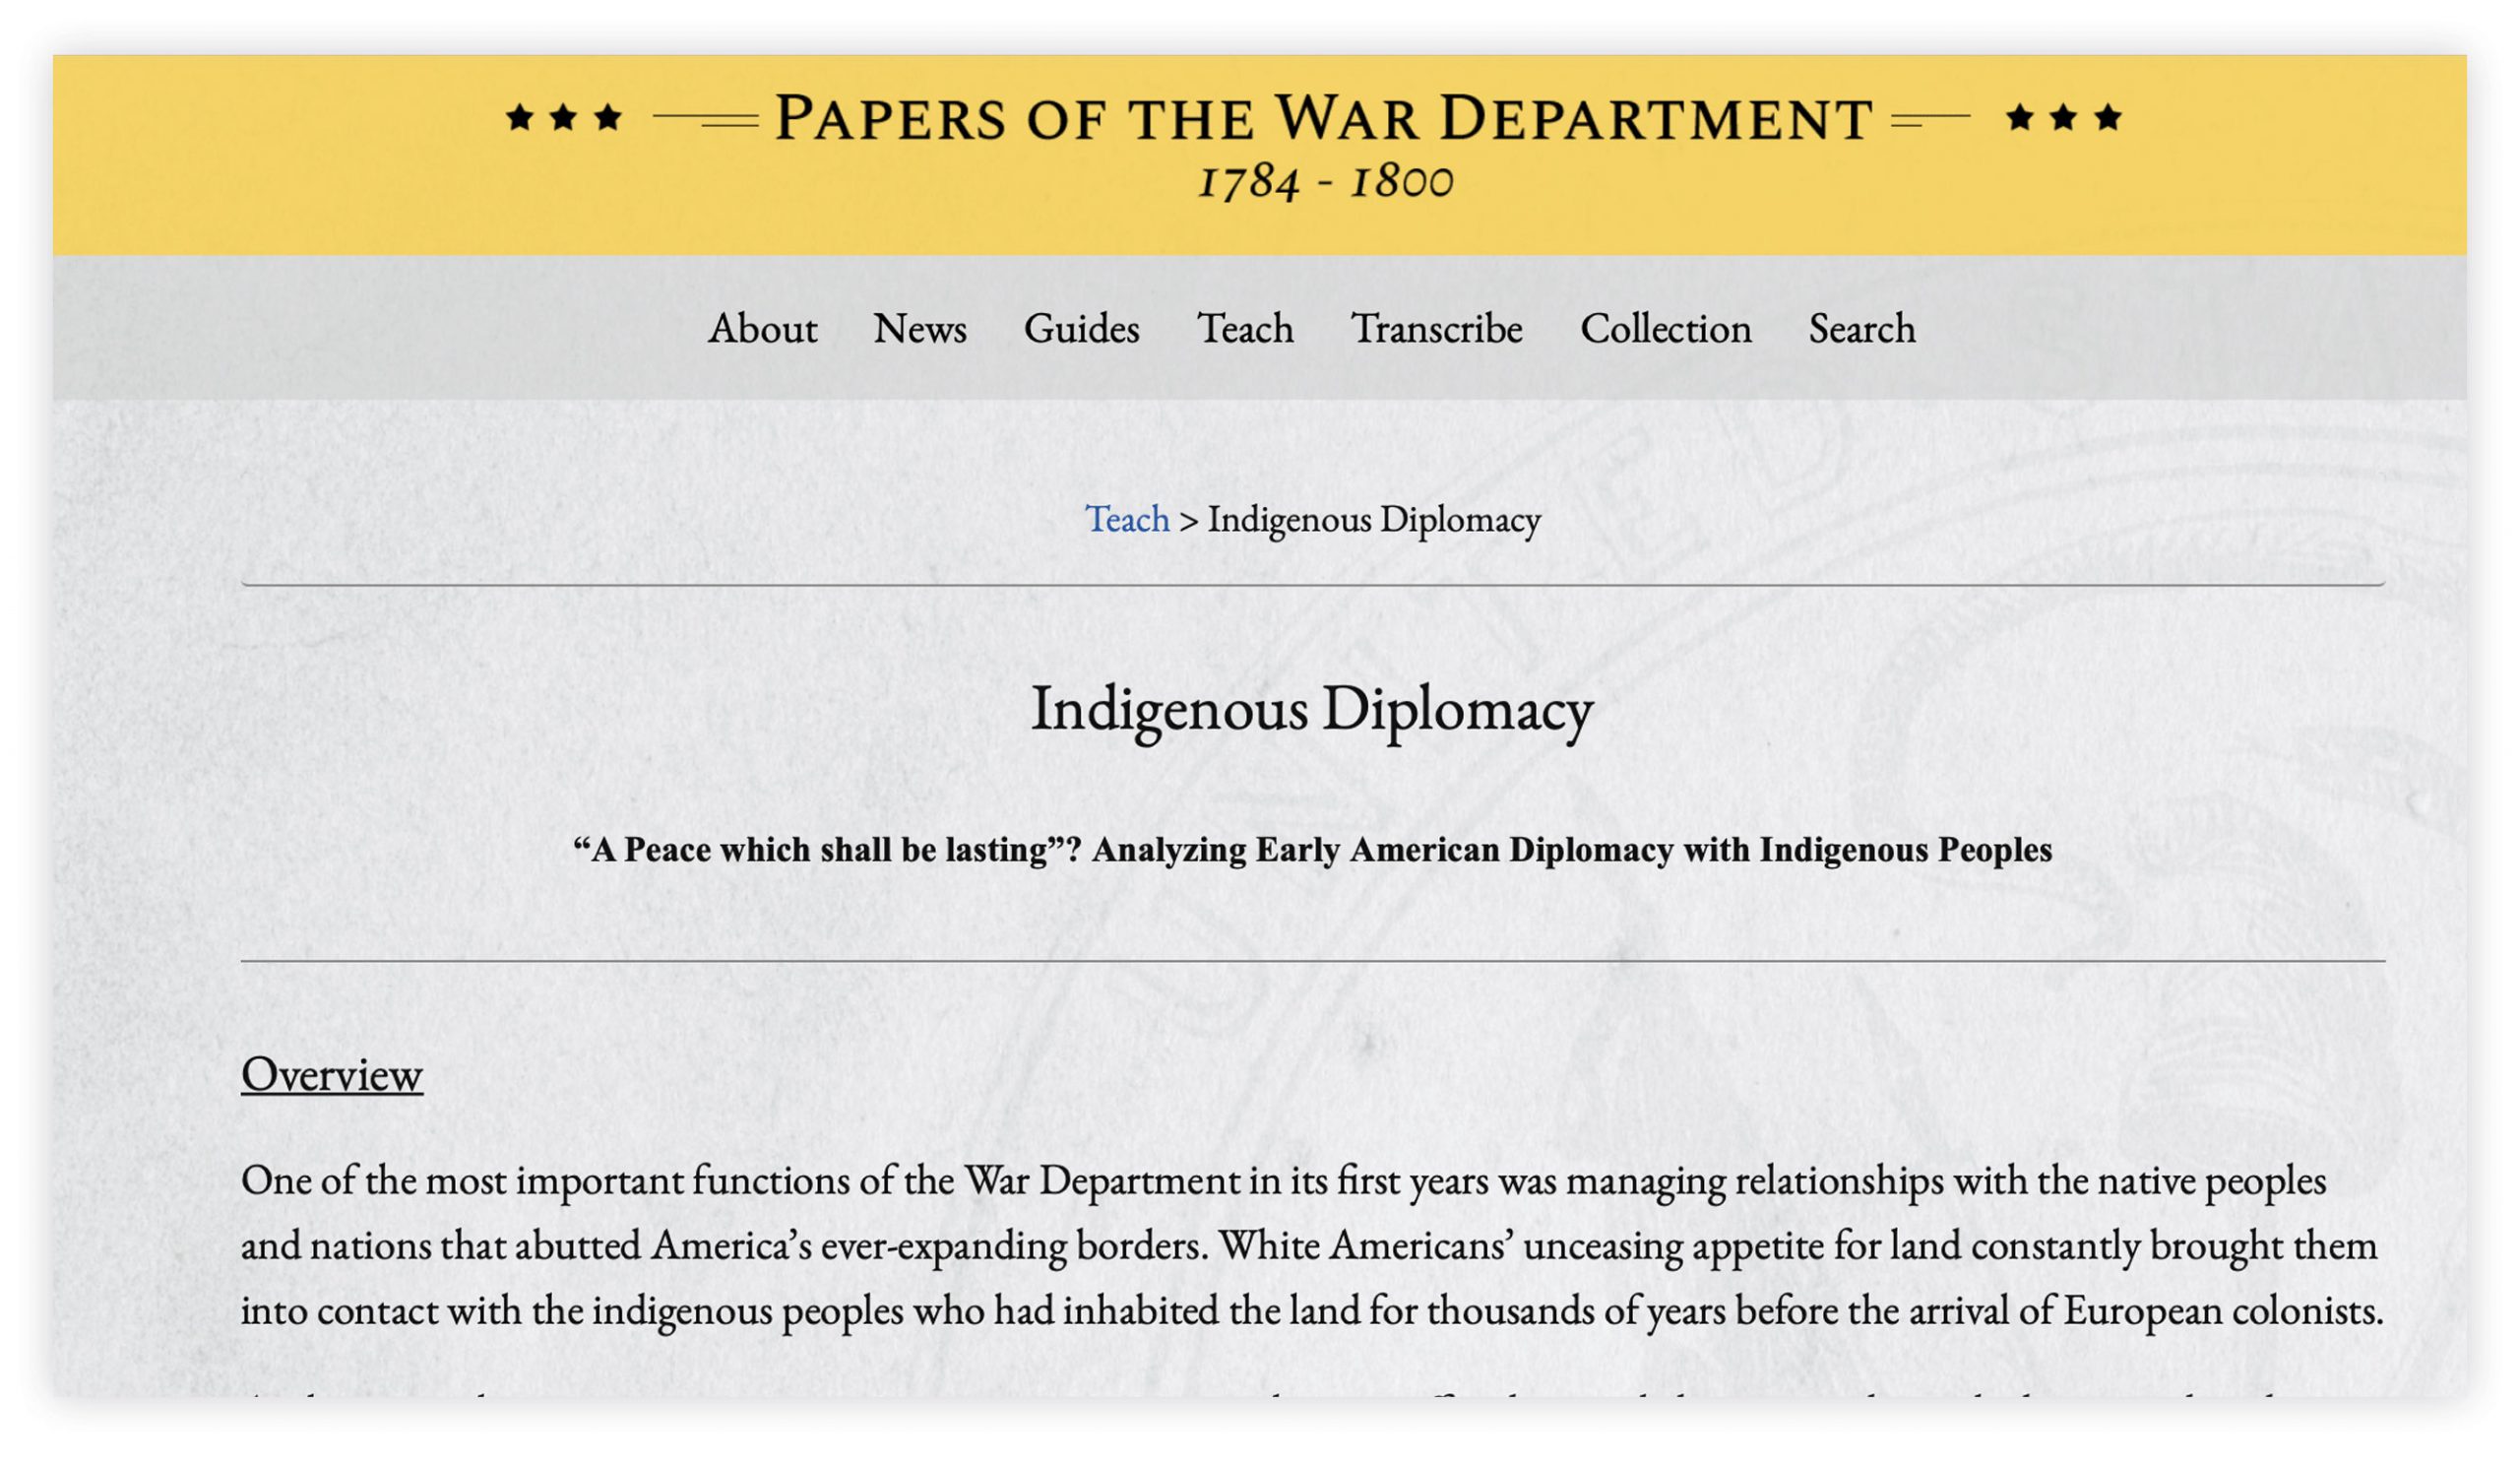 Screengrab of the Papers of the War Department website home page.